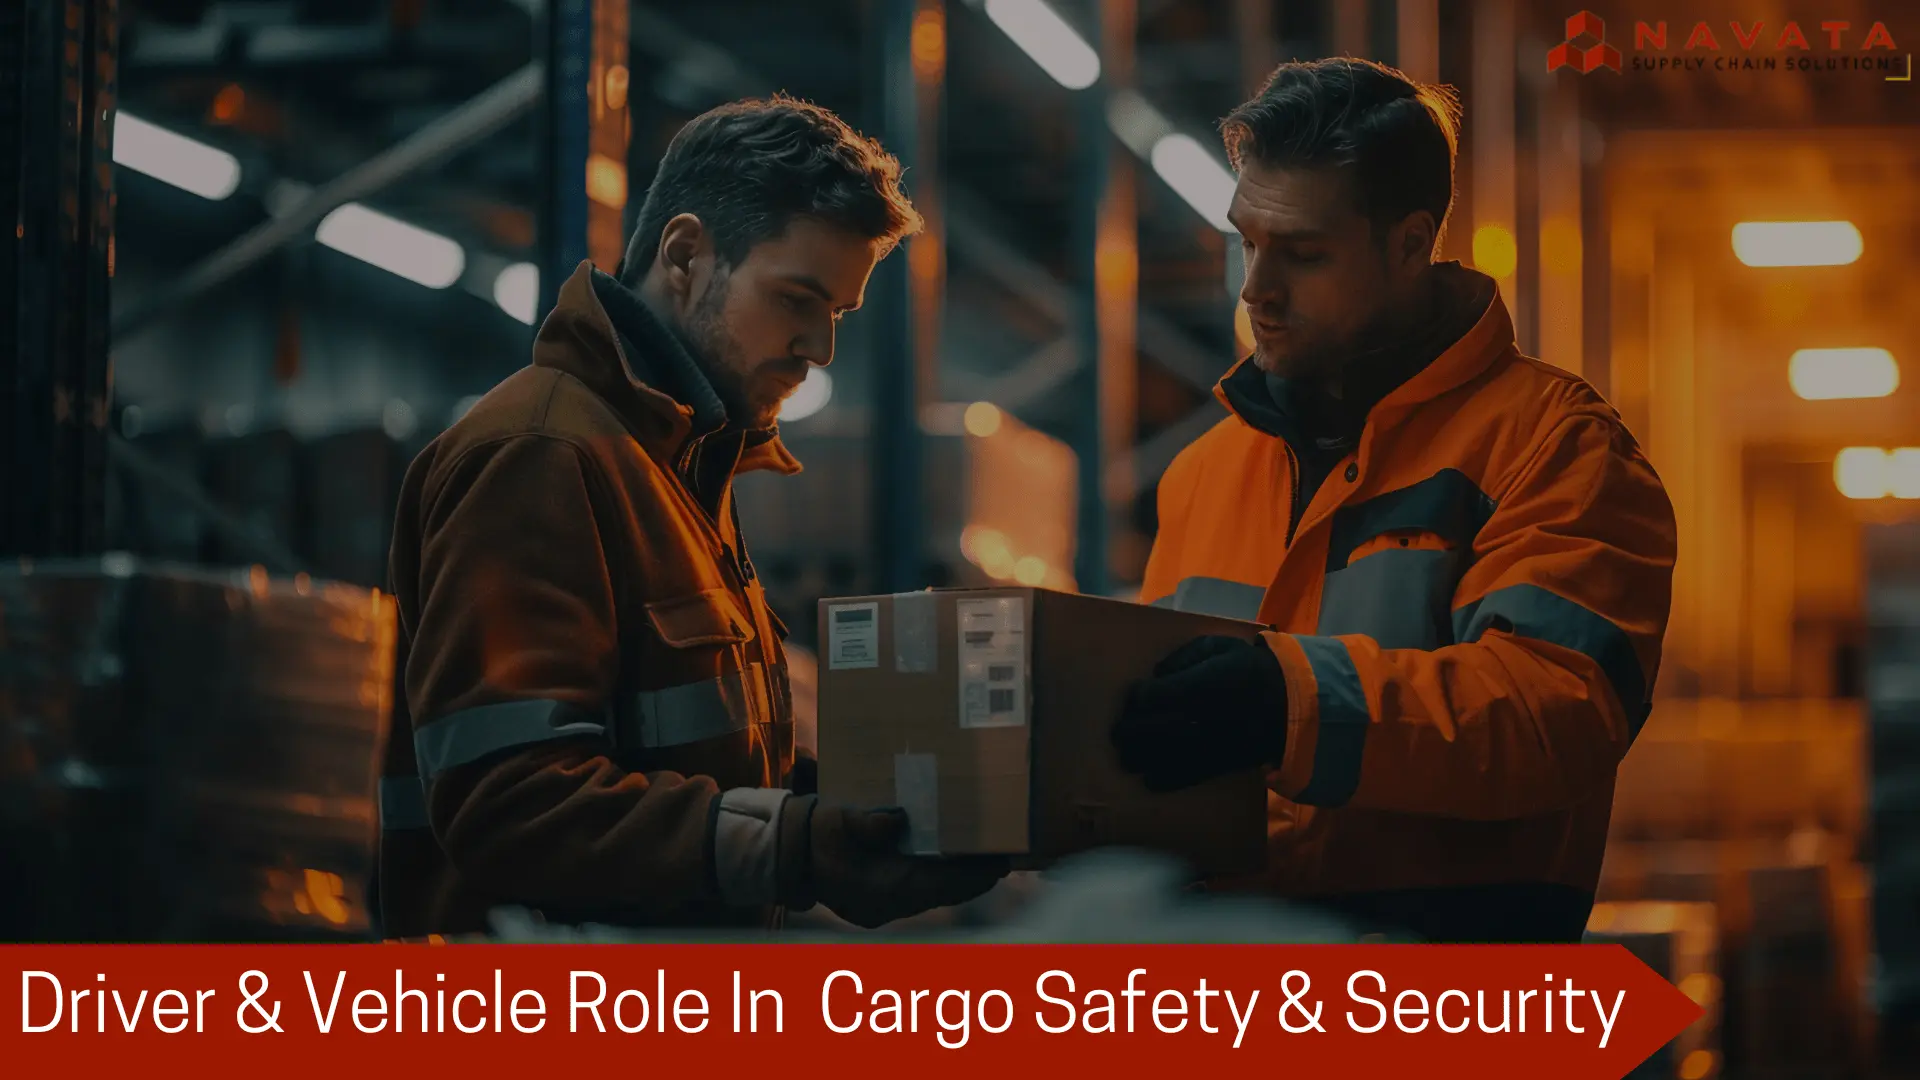 Cargo Safety & Security